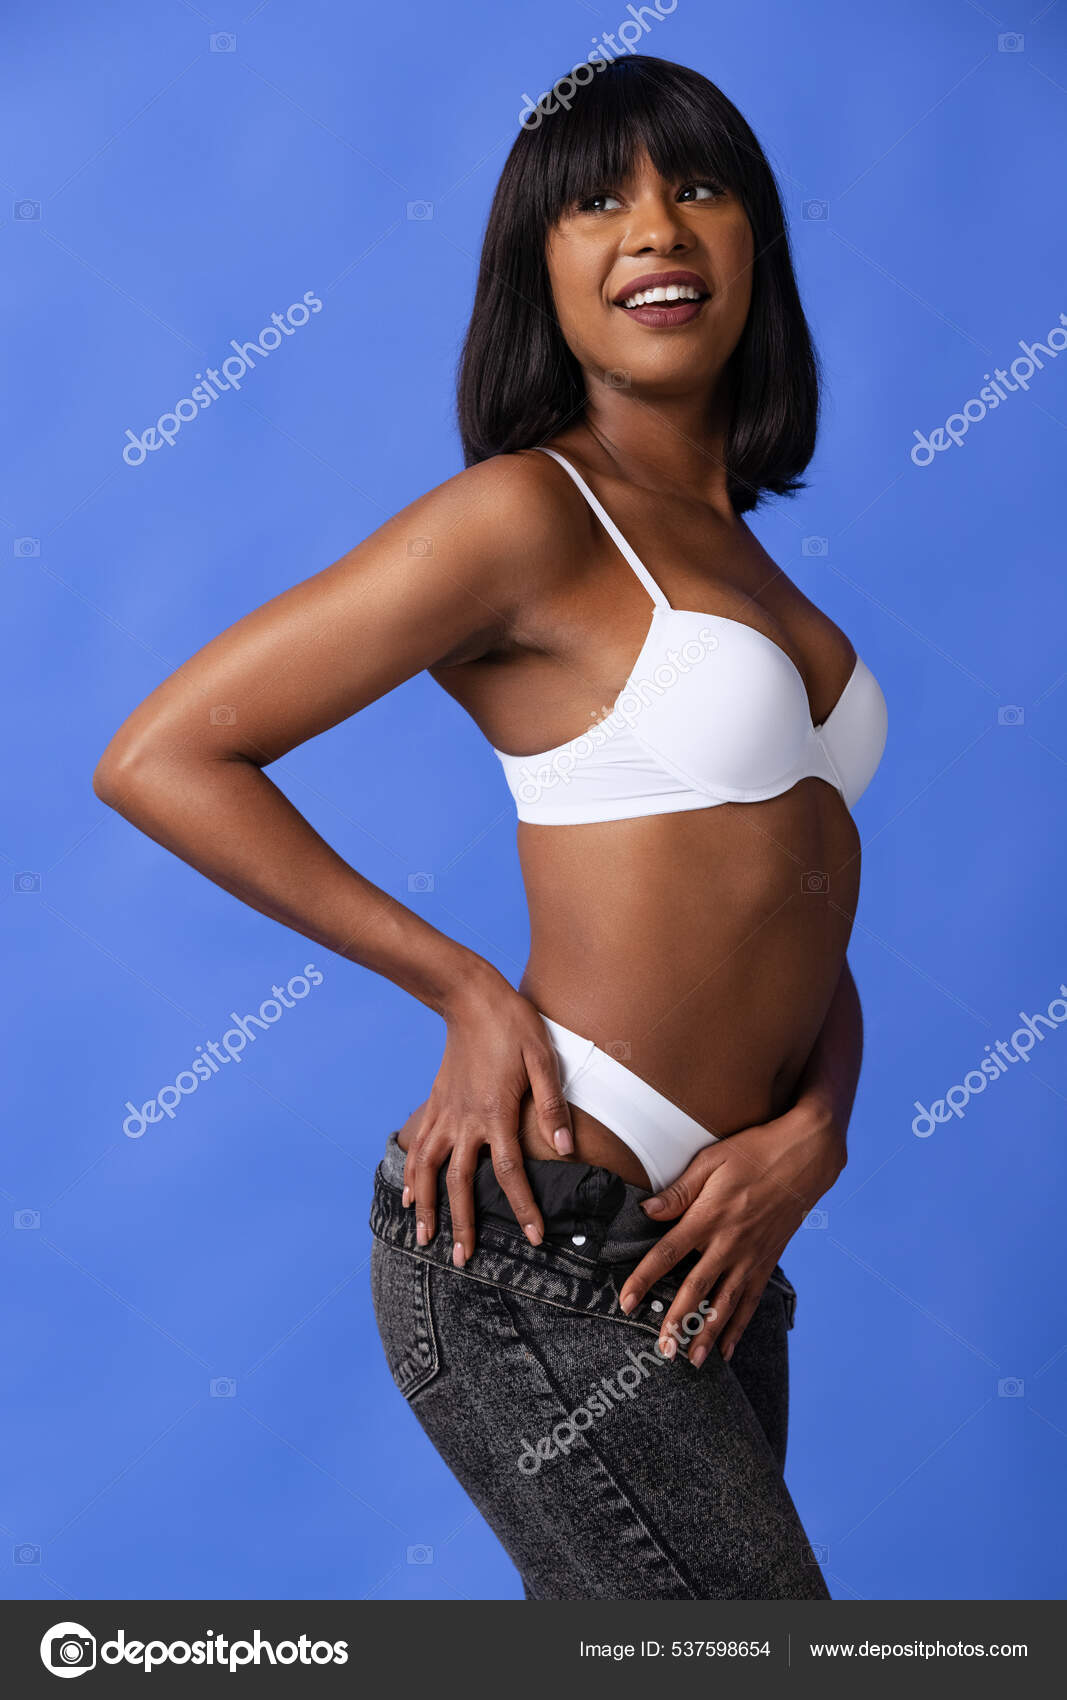 The Body Of A Young And Beautiful Woman In Female Underwear Showing Lingerie  To The Camera, Isolated On A Gray Background. Fashion Concept, Copy Space.  Stock Photo, Picture and Royalty Free Image.